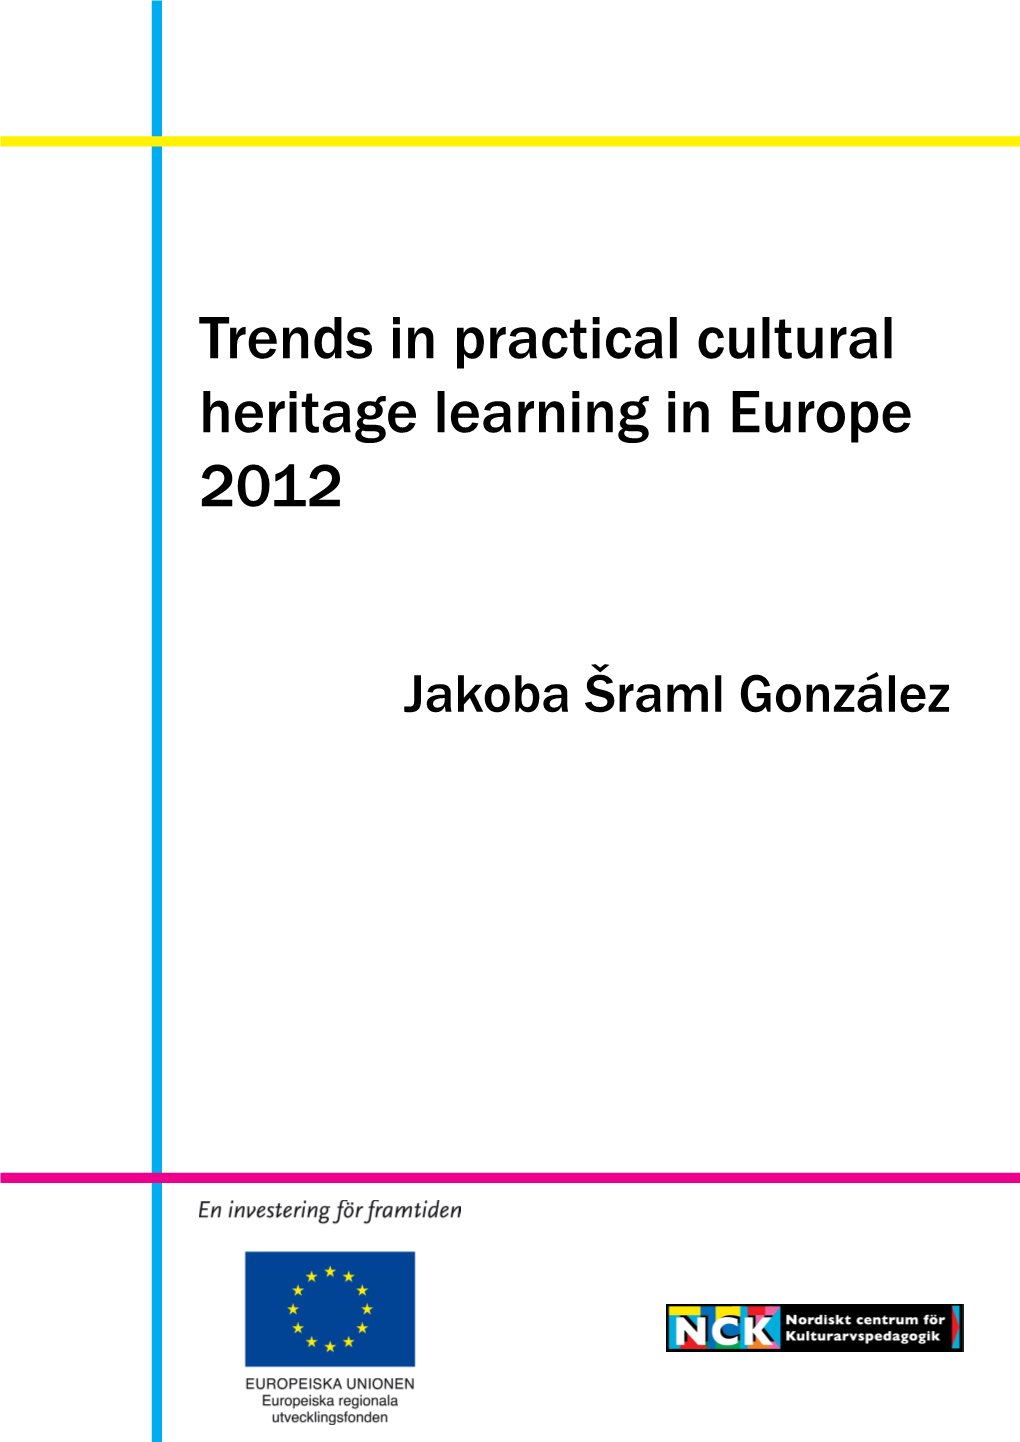 Trends in Practical Cultural Heritage Learning in Europe 2012